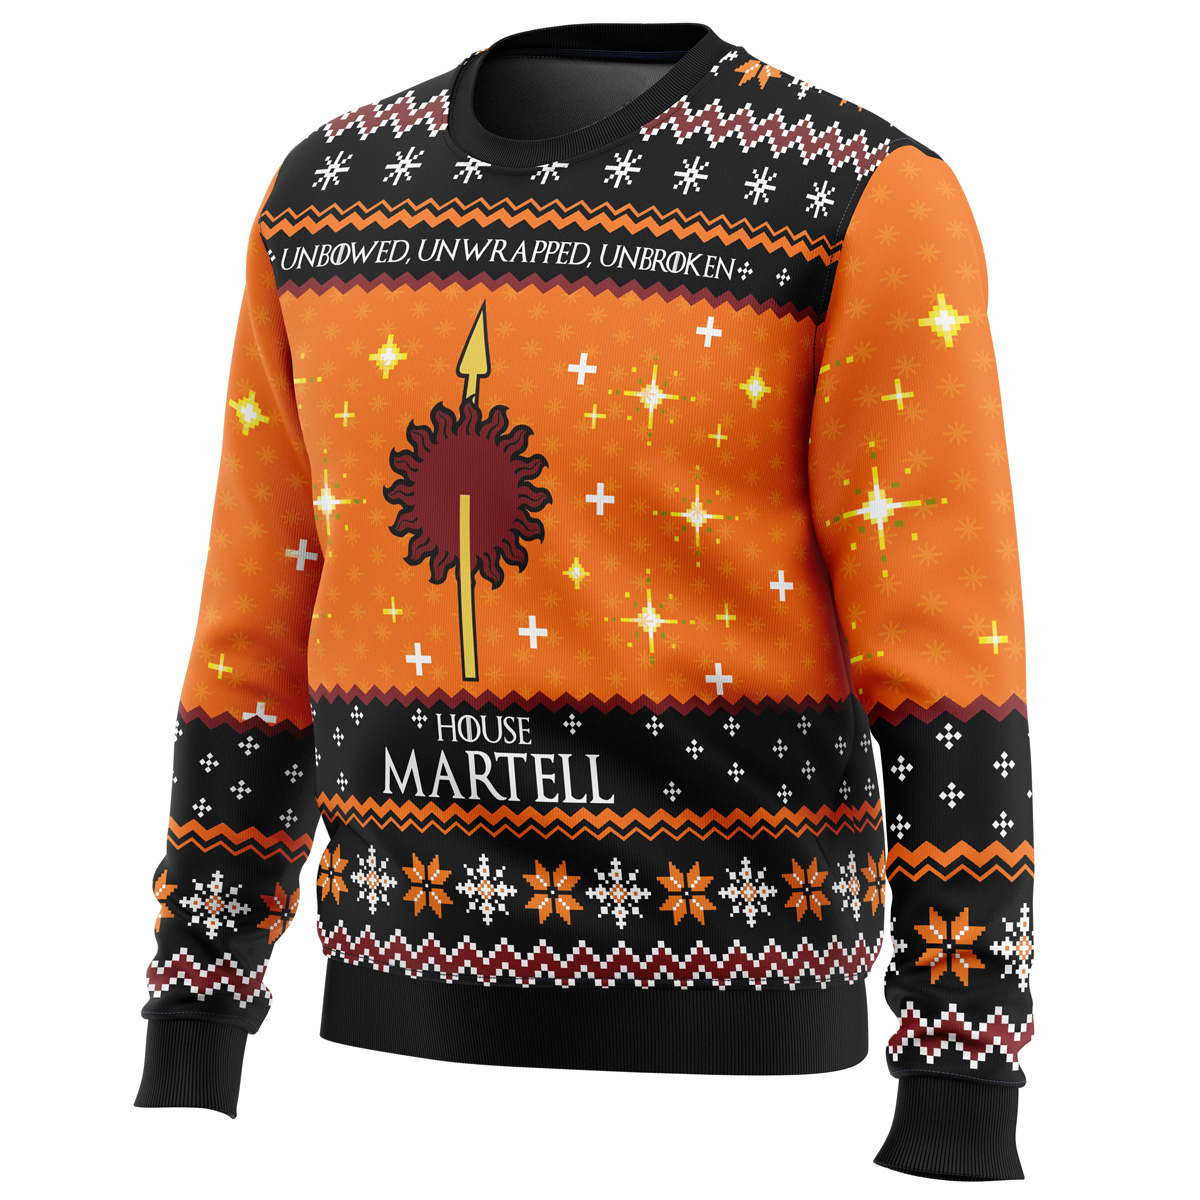 Game of Thrones House Martell Ugly Christmas Sweater 1